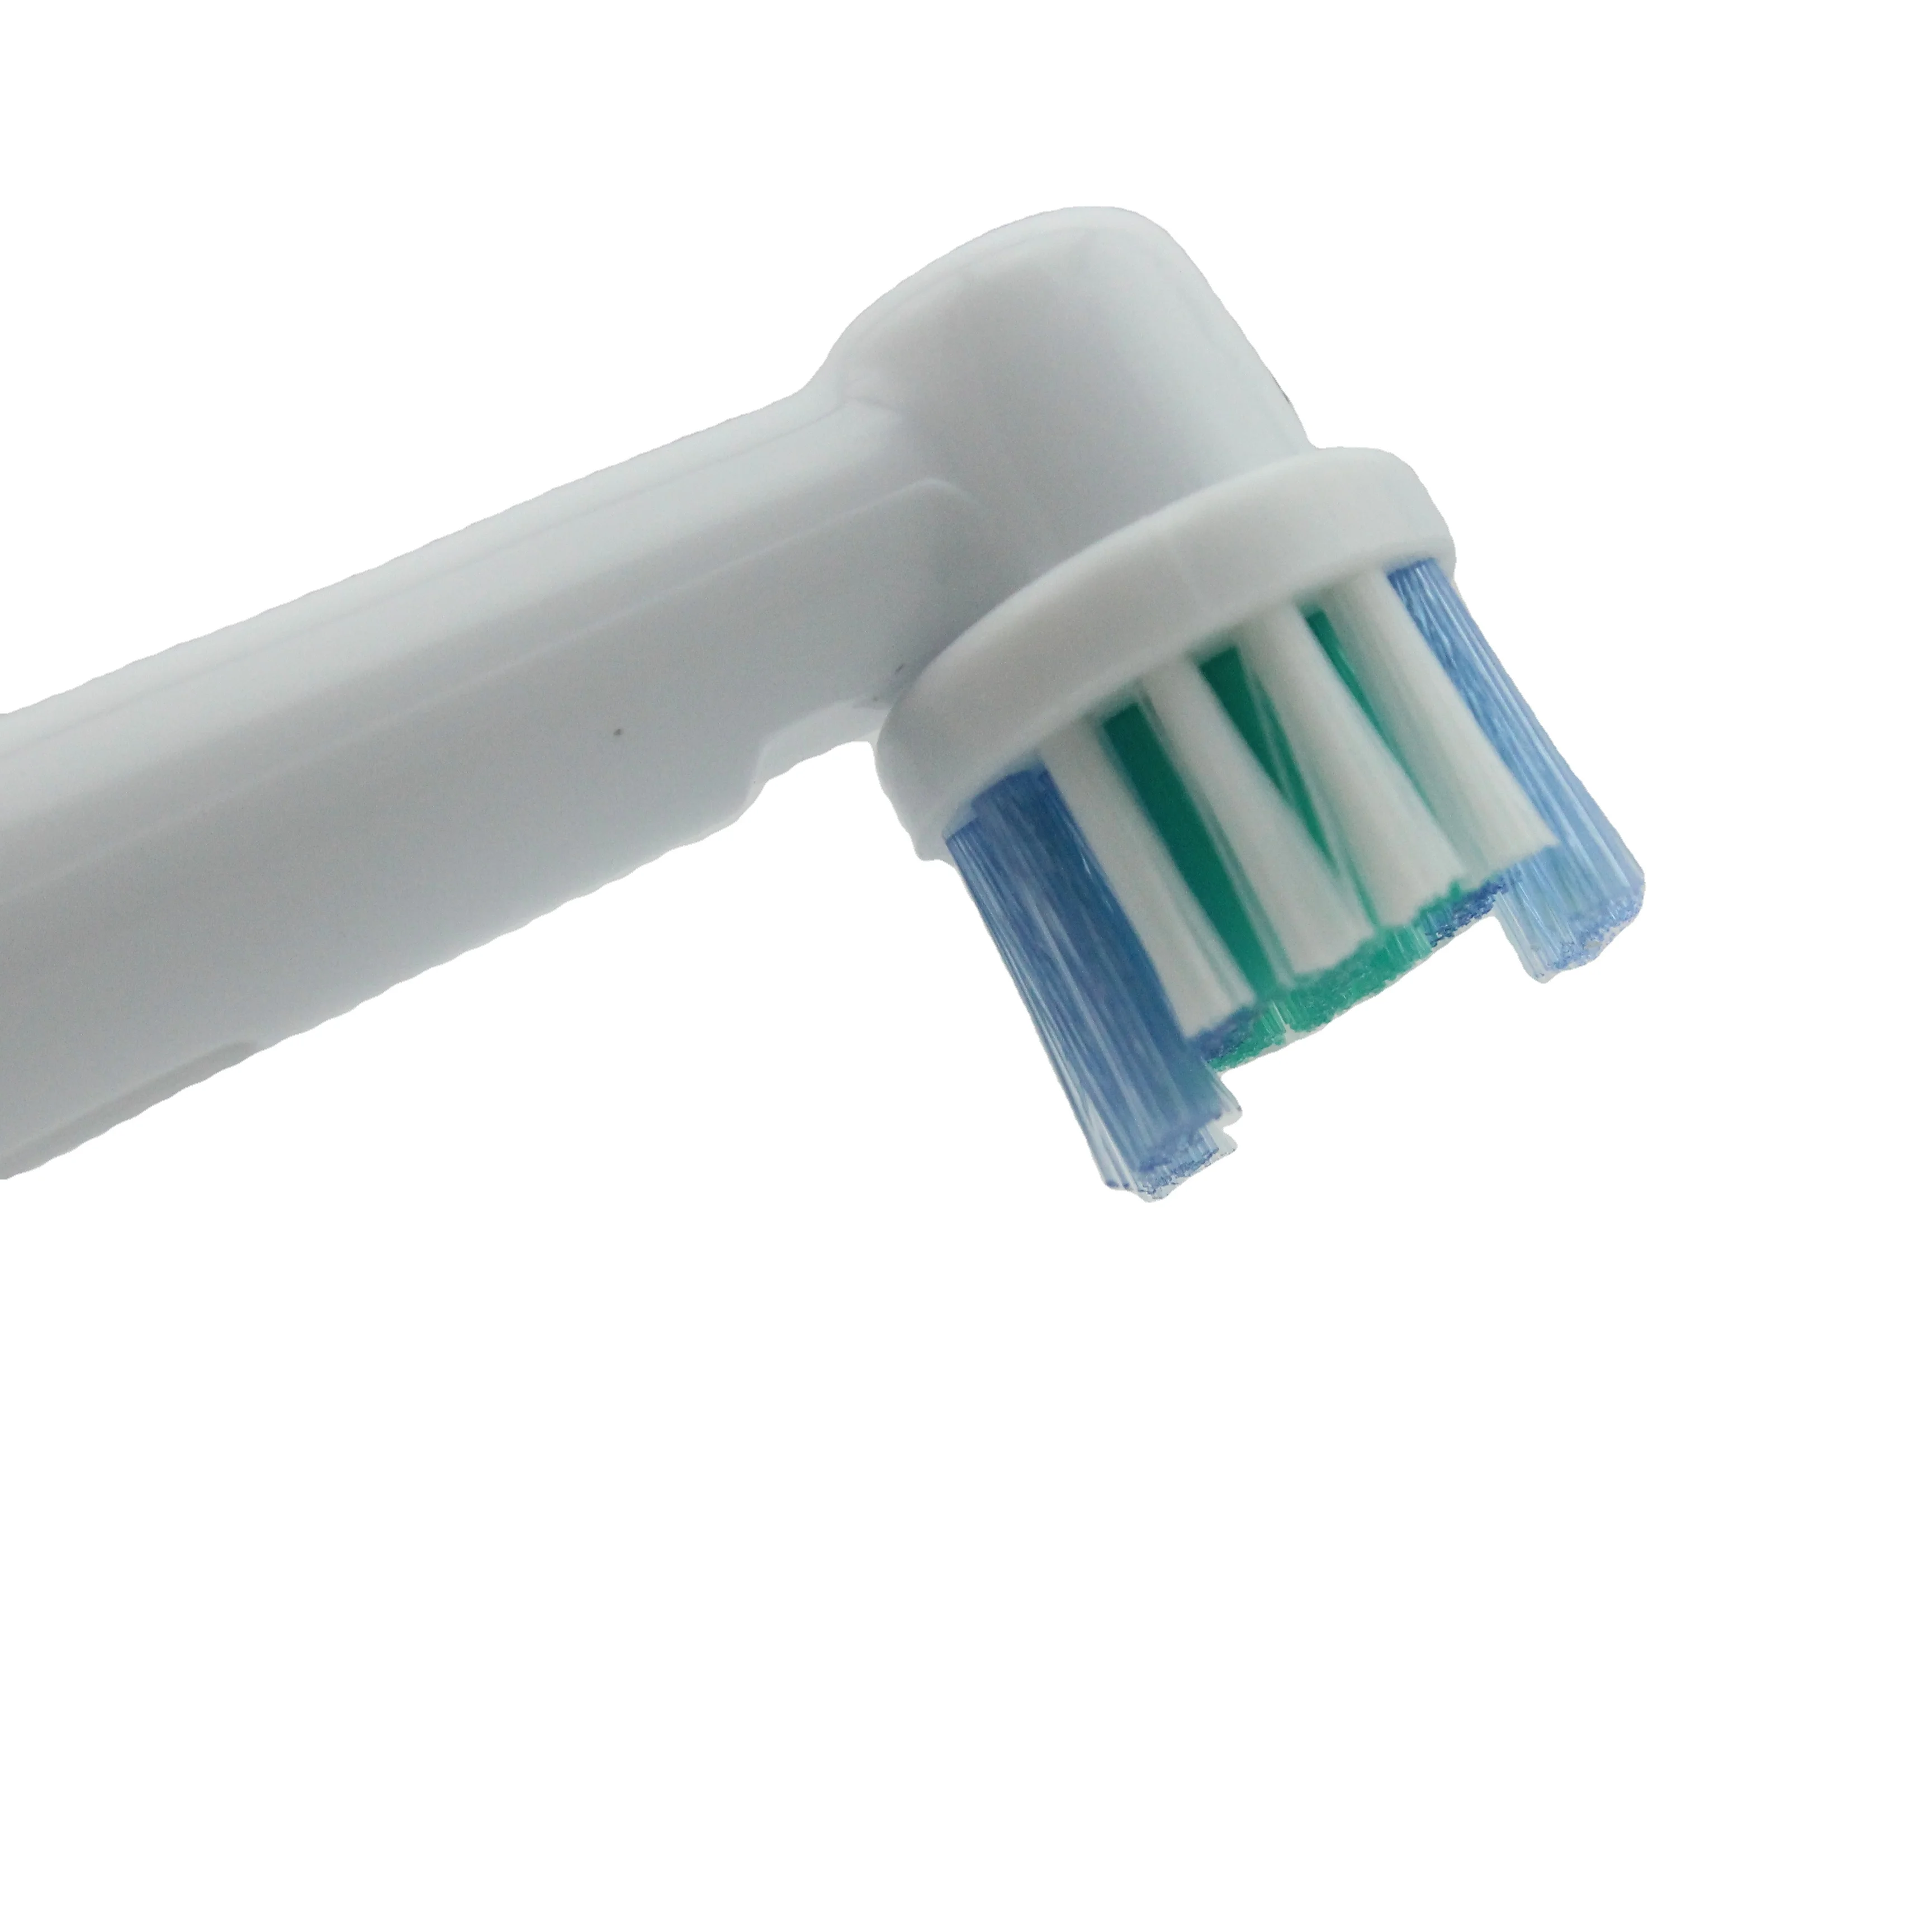 

Generic Replacement Toothbrush Heads SB-17A Compatible Oral Brushes